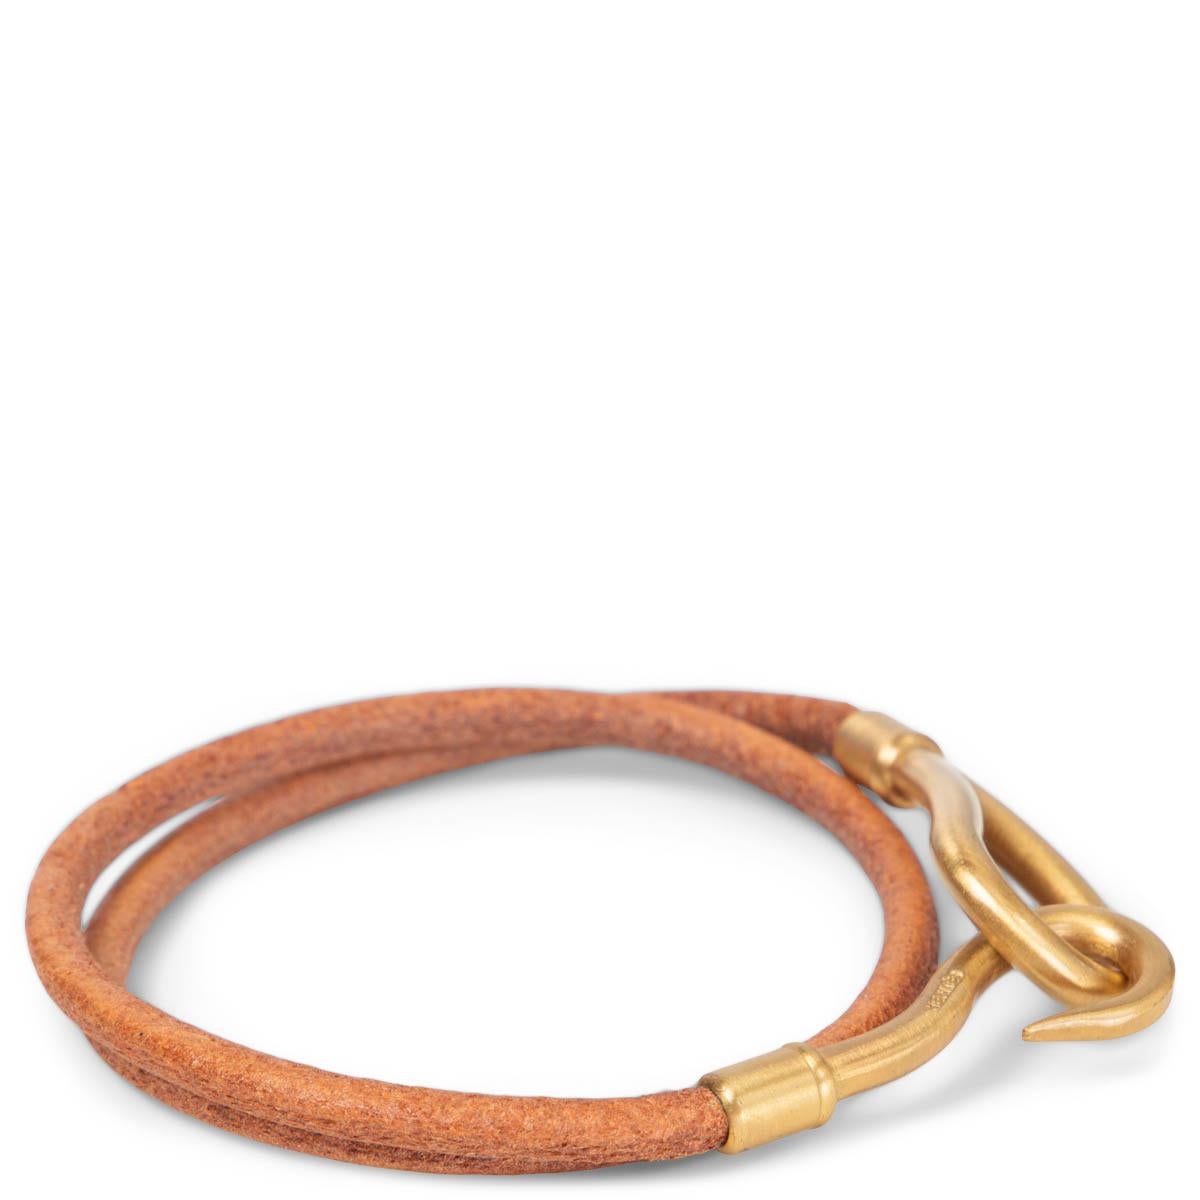 100% authentic Hermès Jumbo Hook Double Tour bracelet in cuir naturel (brown) leather featuring matt gold-tone hardware. Has been worn and is in excellent condition. Comes with box. 

Measurements
Width	1.5cm (0.6in)
Length	37cm